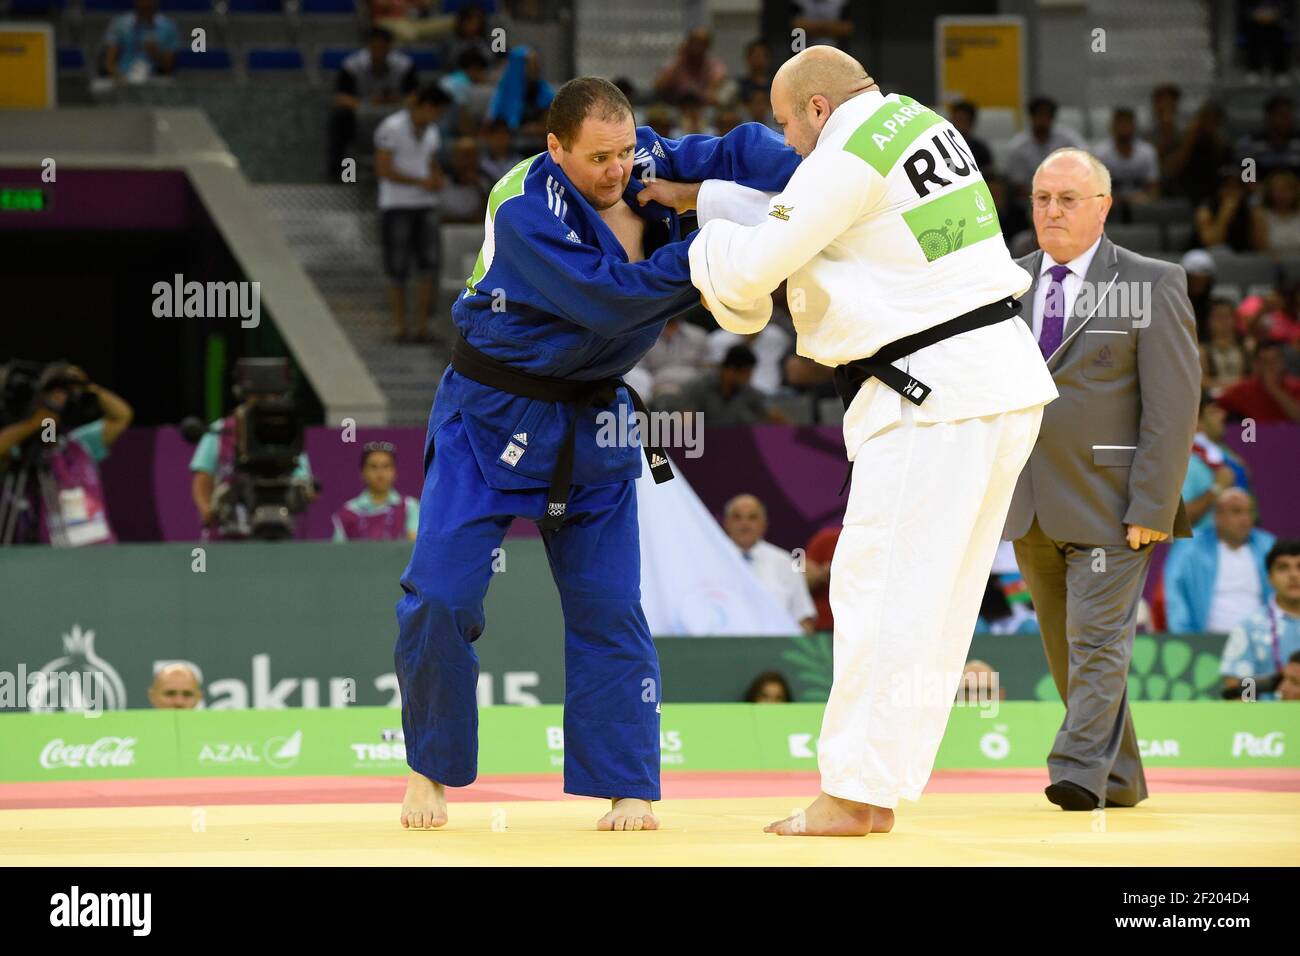 Julien Taurines of France (blue) competes in Judo Blind Men's +90kg against  Aleksandr Parasiuk of Russia (white) during the 1st European Games 2015 in  Baku, Azerbaijan, Day 14, on June 26, 2015 -